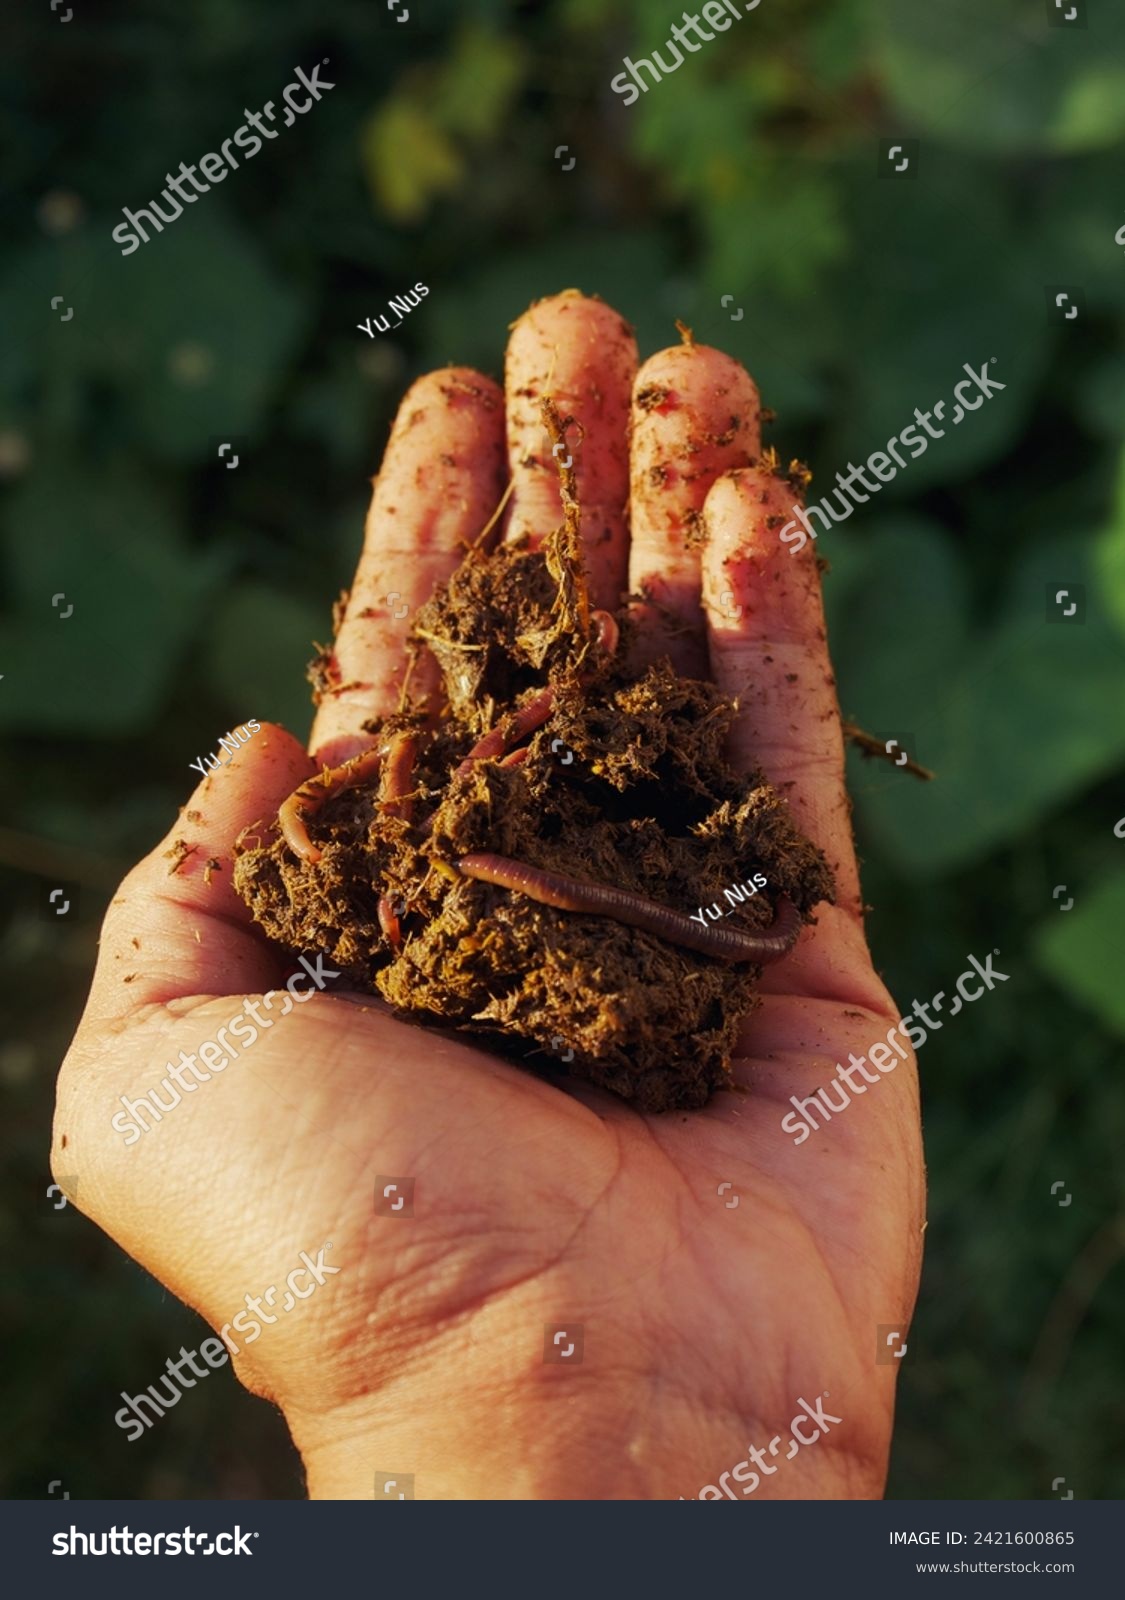 Earthworms in cow dung on a man's hand #2421600865